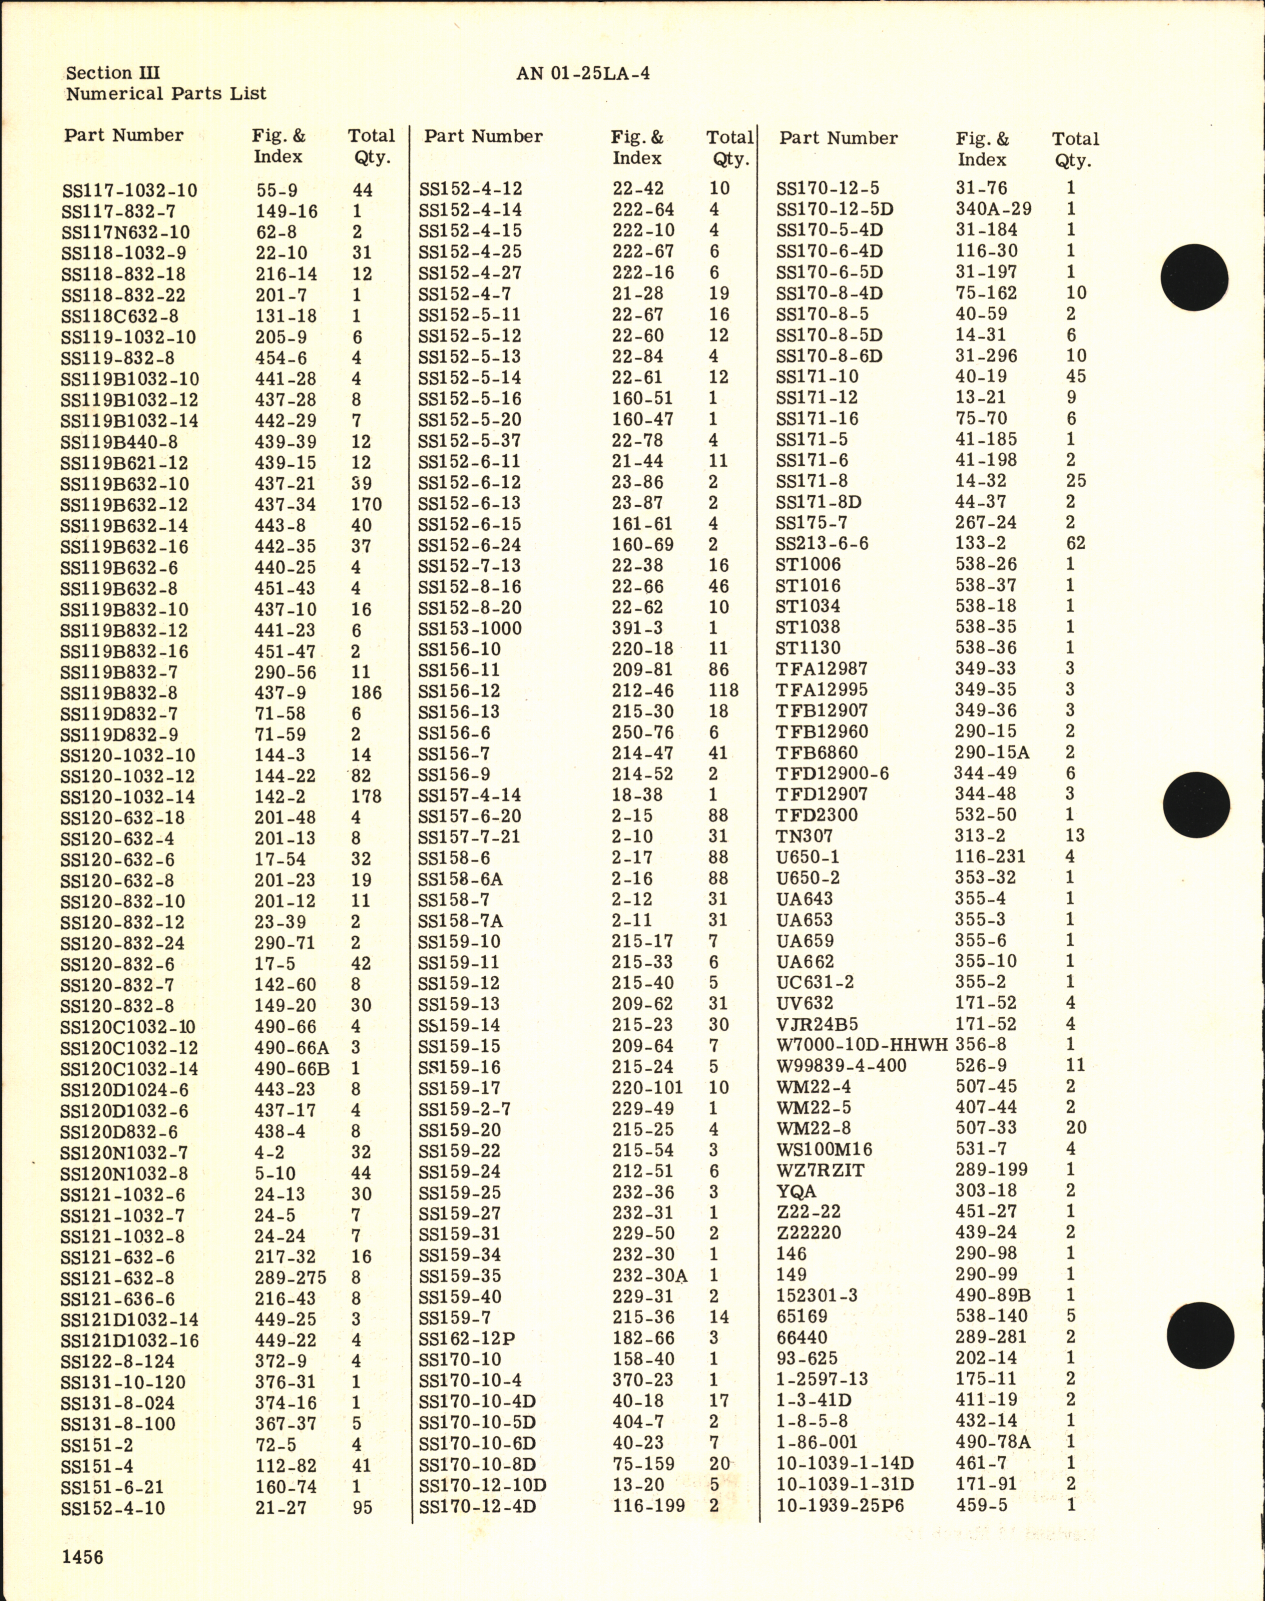 Sample page 6 from AirCorps Library document: Parts Catalog for C-46A, C-46D, and R5C-1